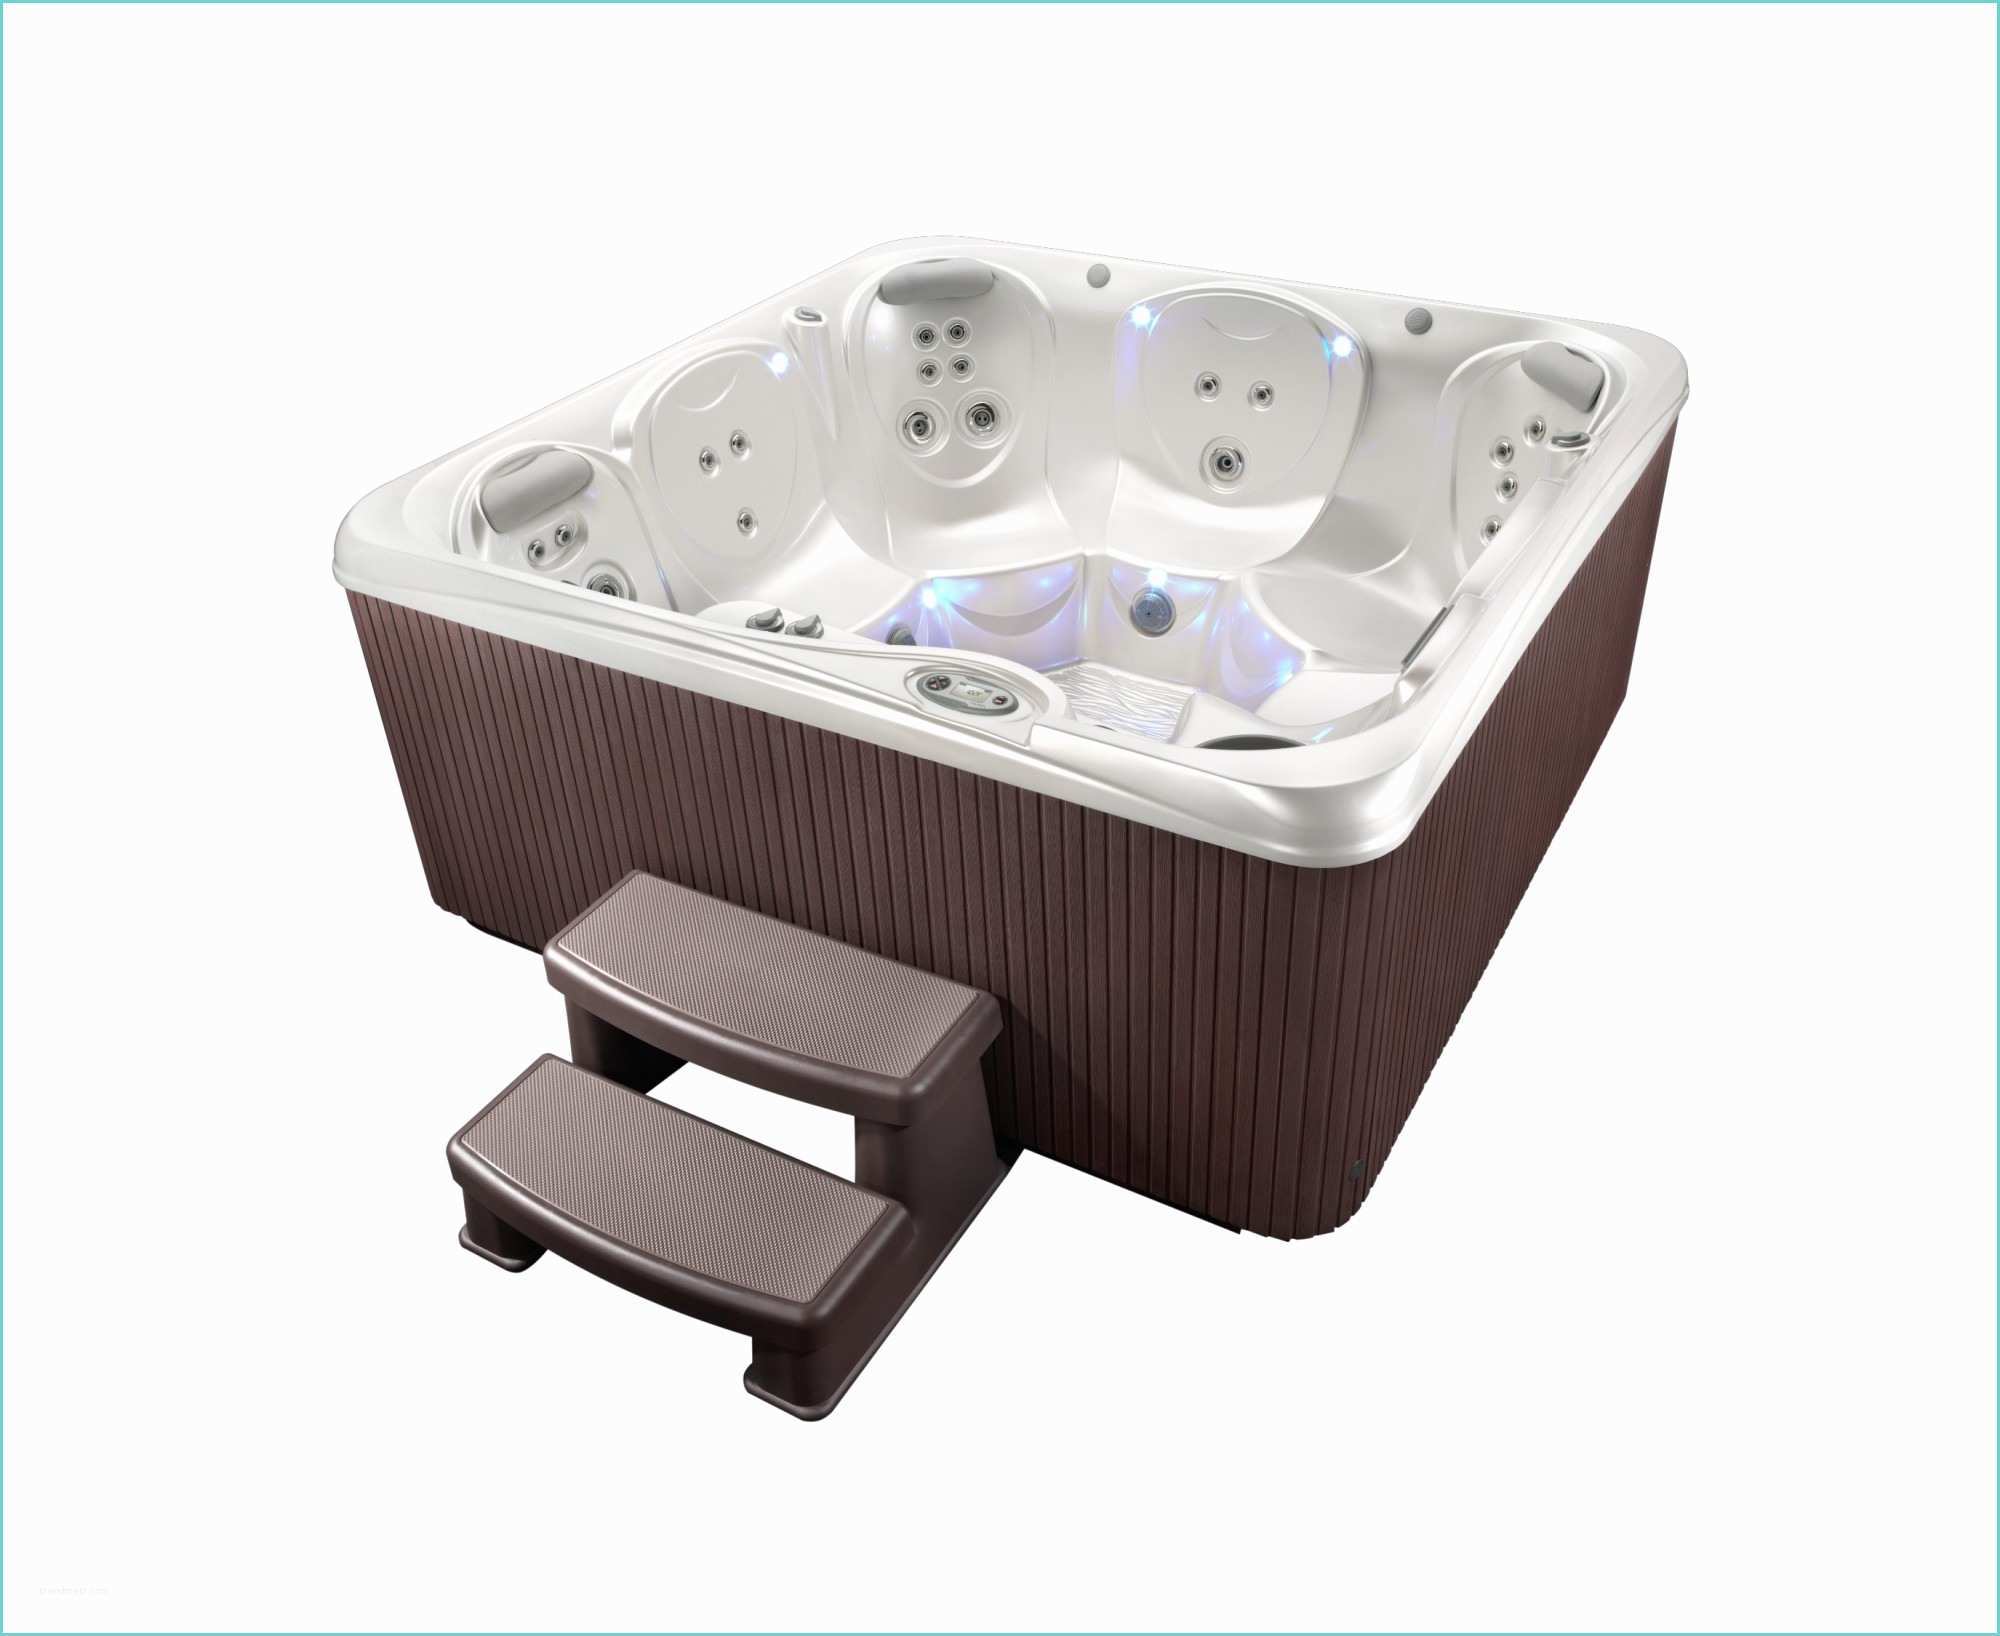 Thank you for visiting Jacuzzi Interieur 4 Places Spa nordic Hot Tubs Impul...